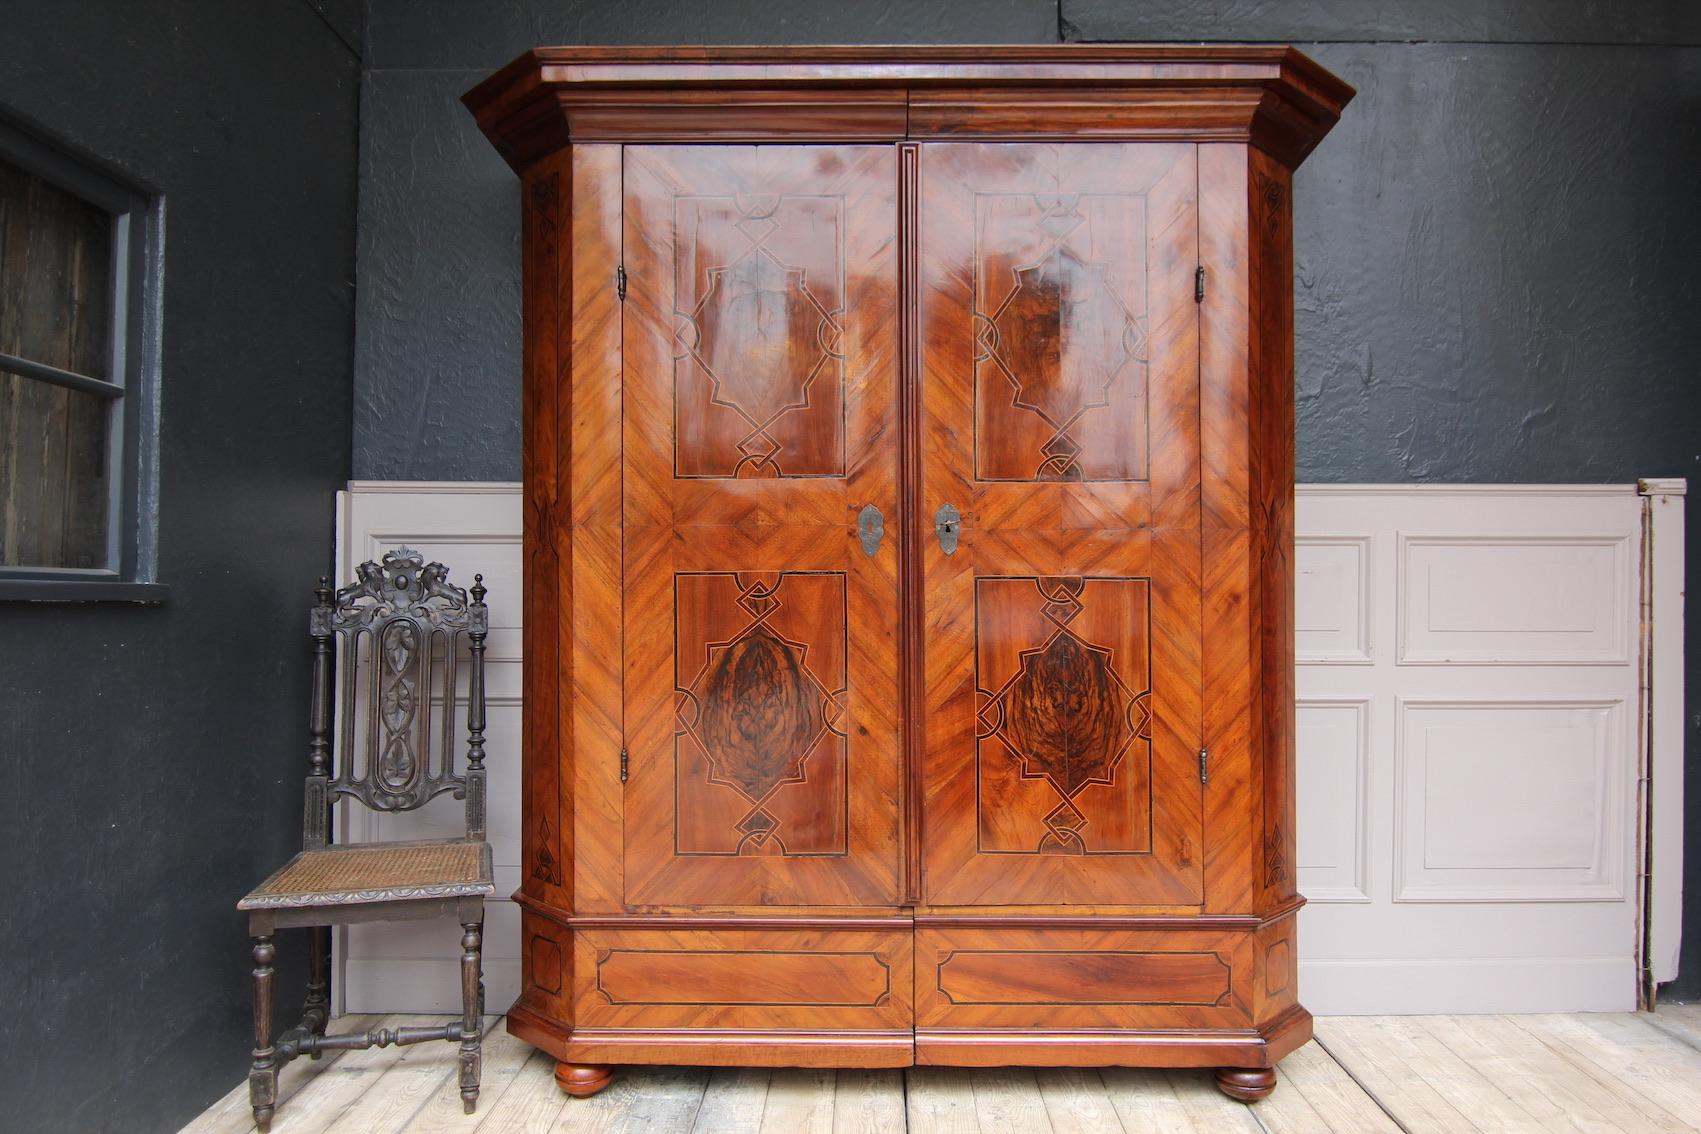 A so-called Maria Theresa cabinet (furniture type named after the Austrian empress) or Baroque hall cabinet from the 18th century.

On ball feet standing two-door coniferous corpus divisible by means of wedge connection with profiled plinth and